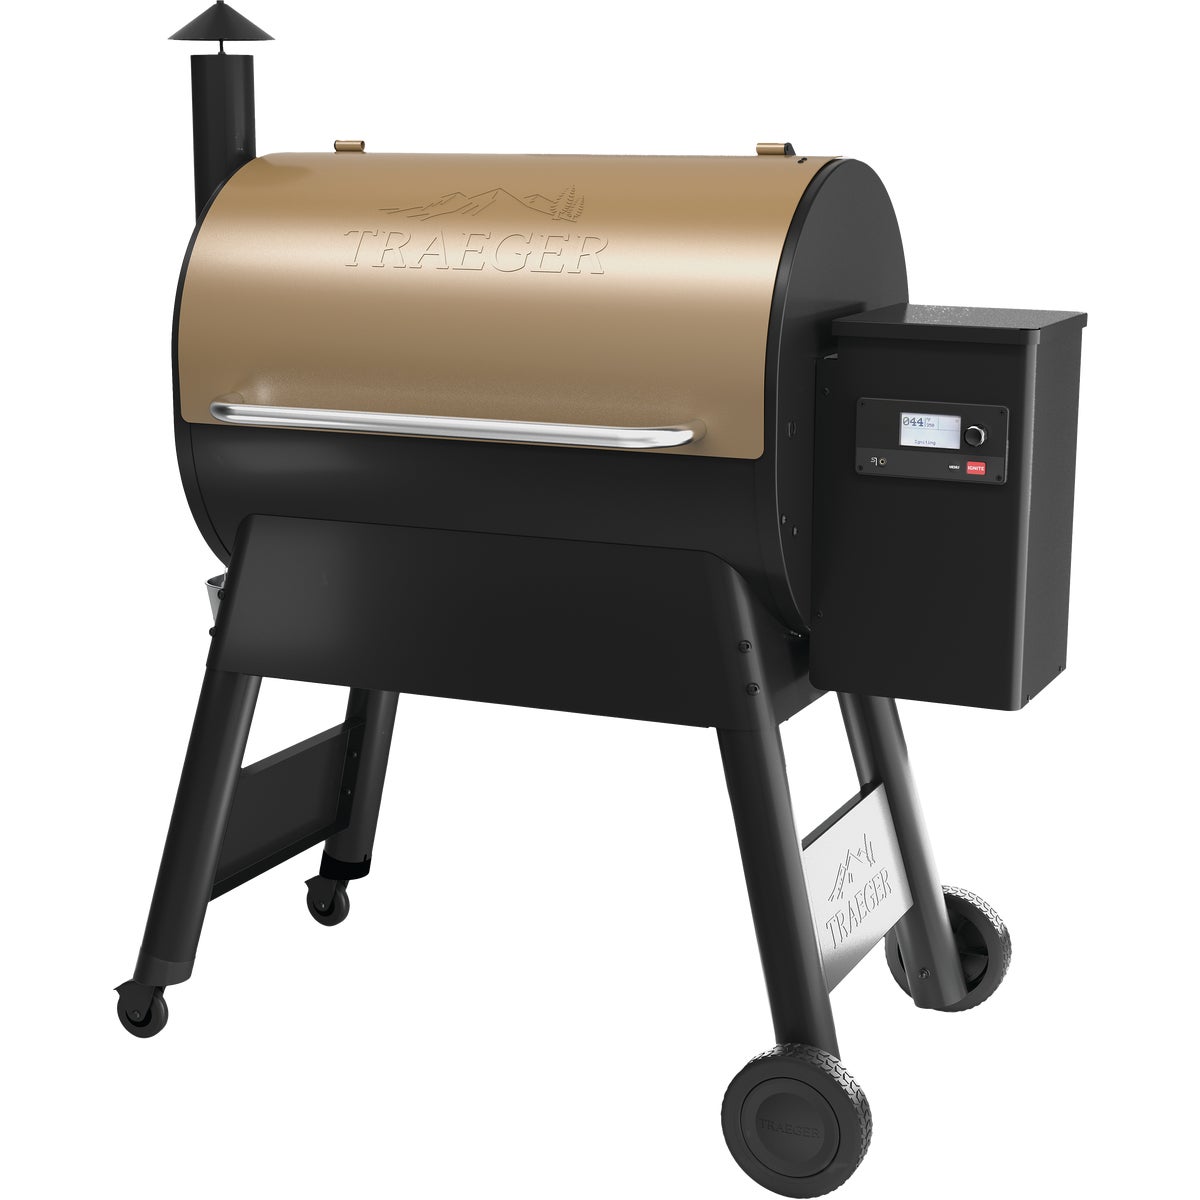 Item 824047, Wood pellet grill featuring WiFIRE technology and a Pro D2 controller.